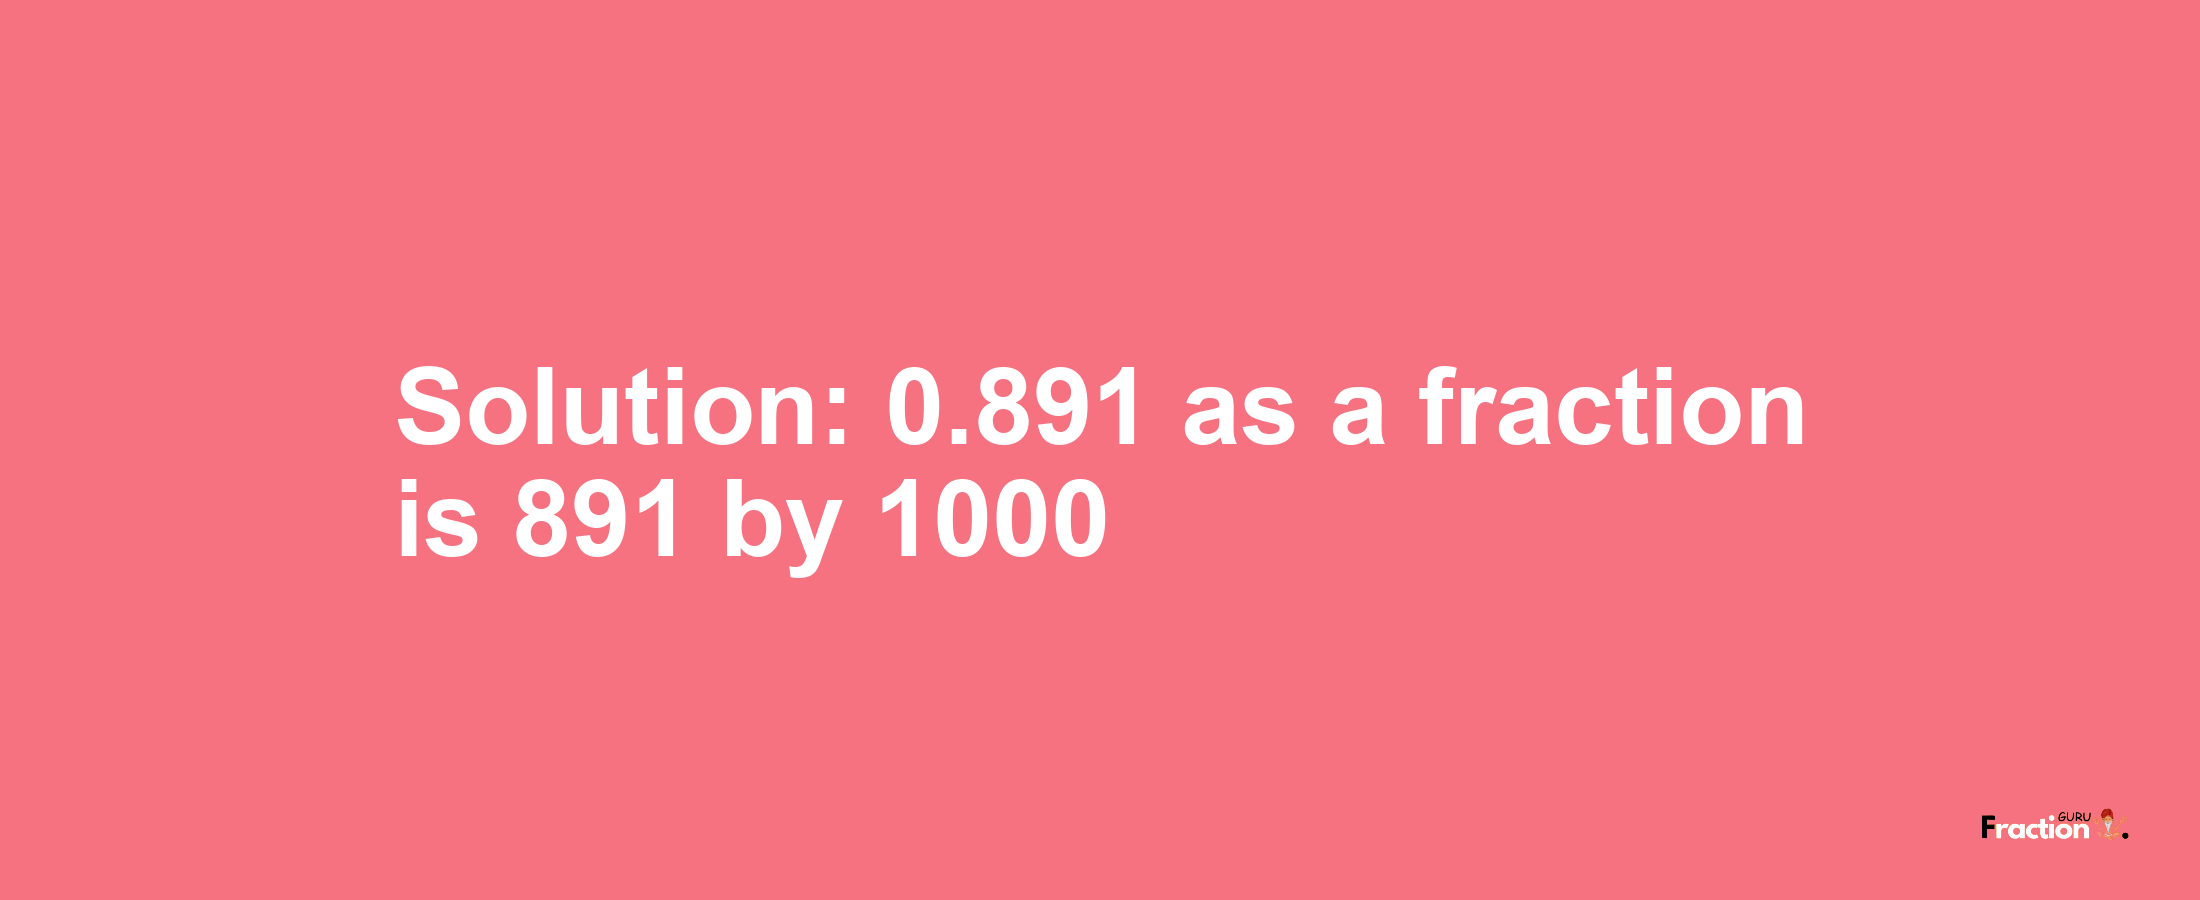 Solution:0.891 as a fraction is 891/1000